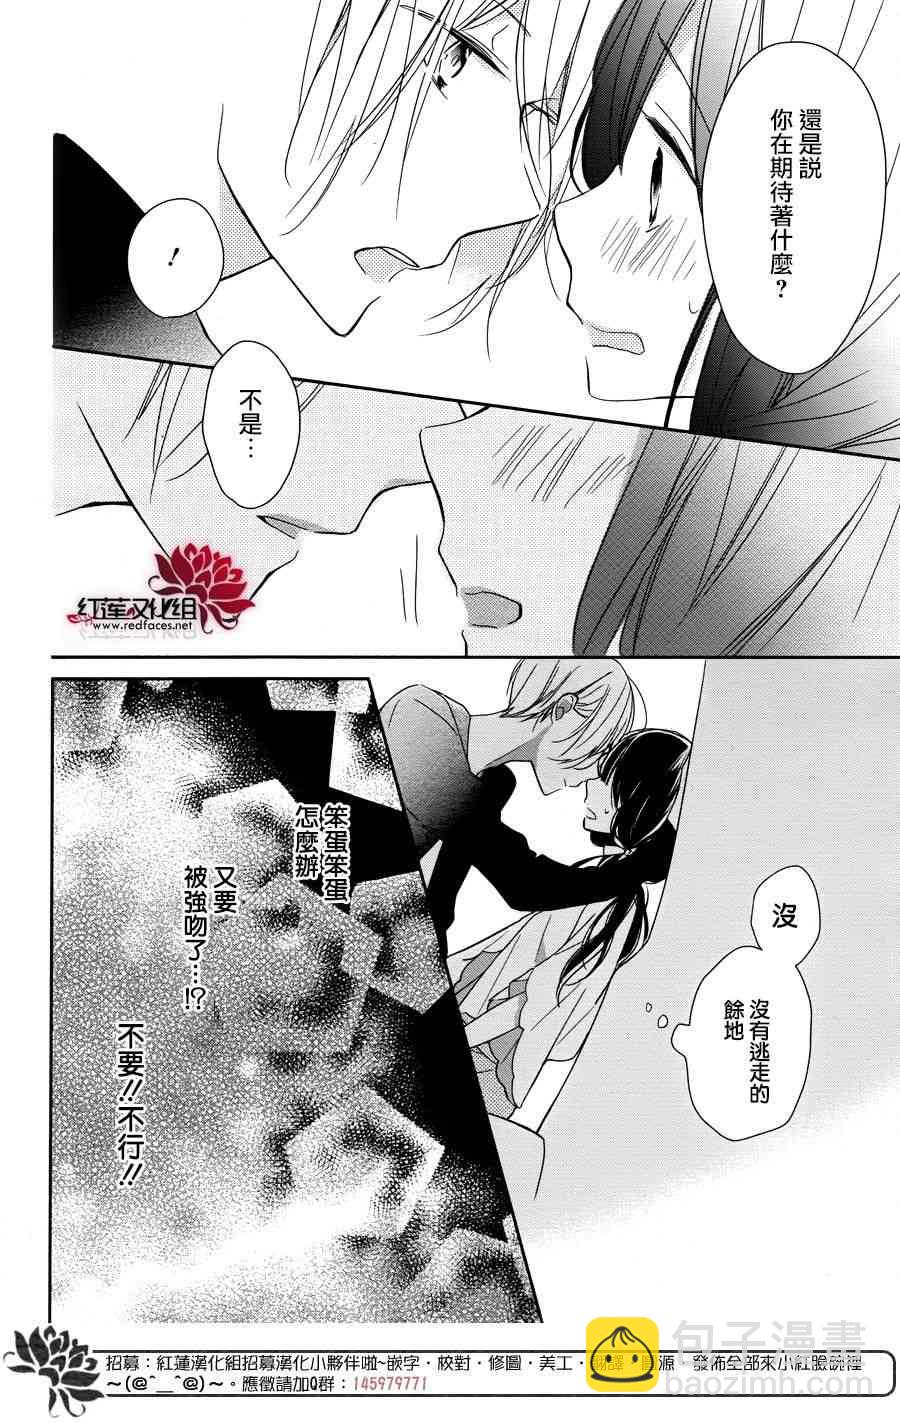 If given a second chance - 2話 - 2